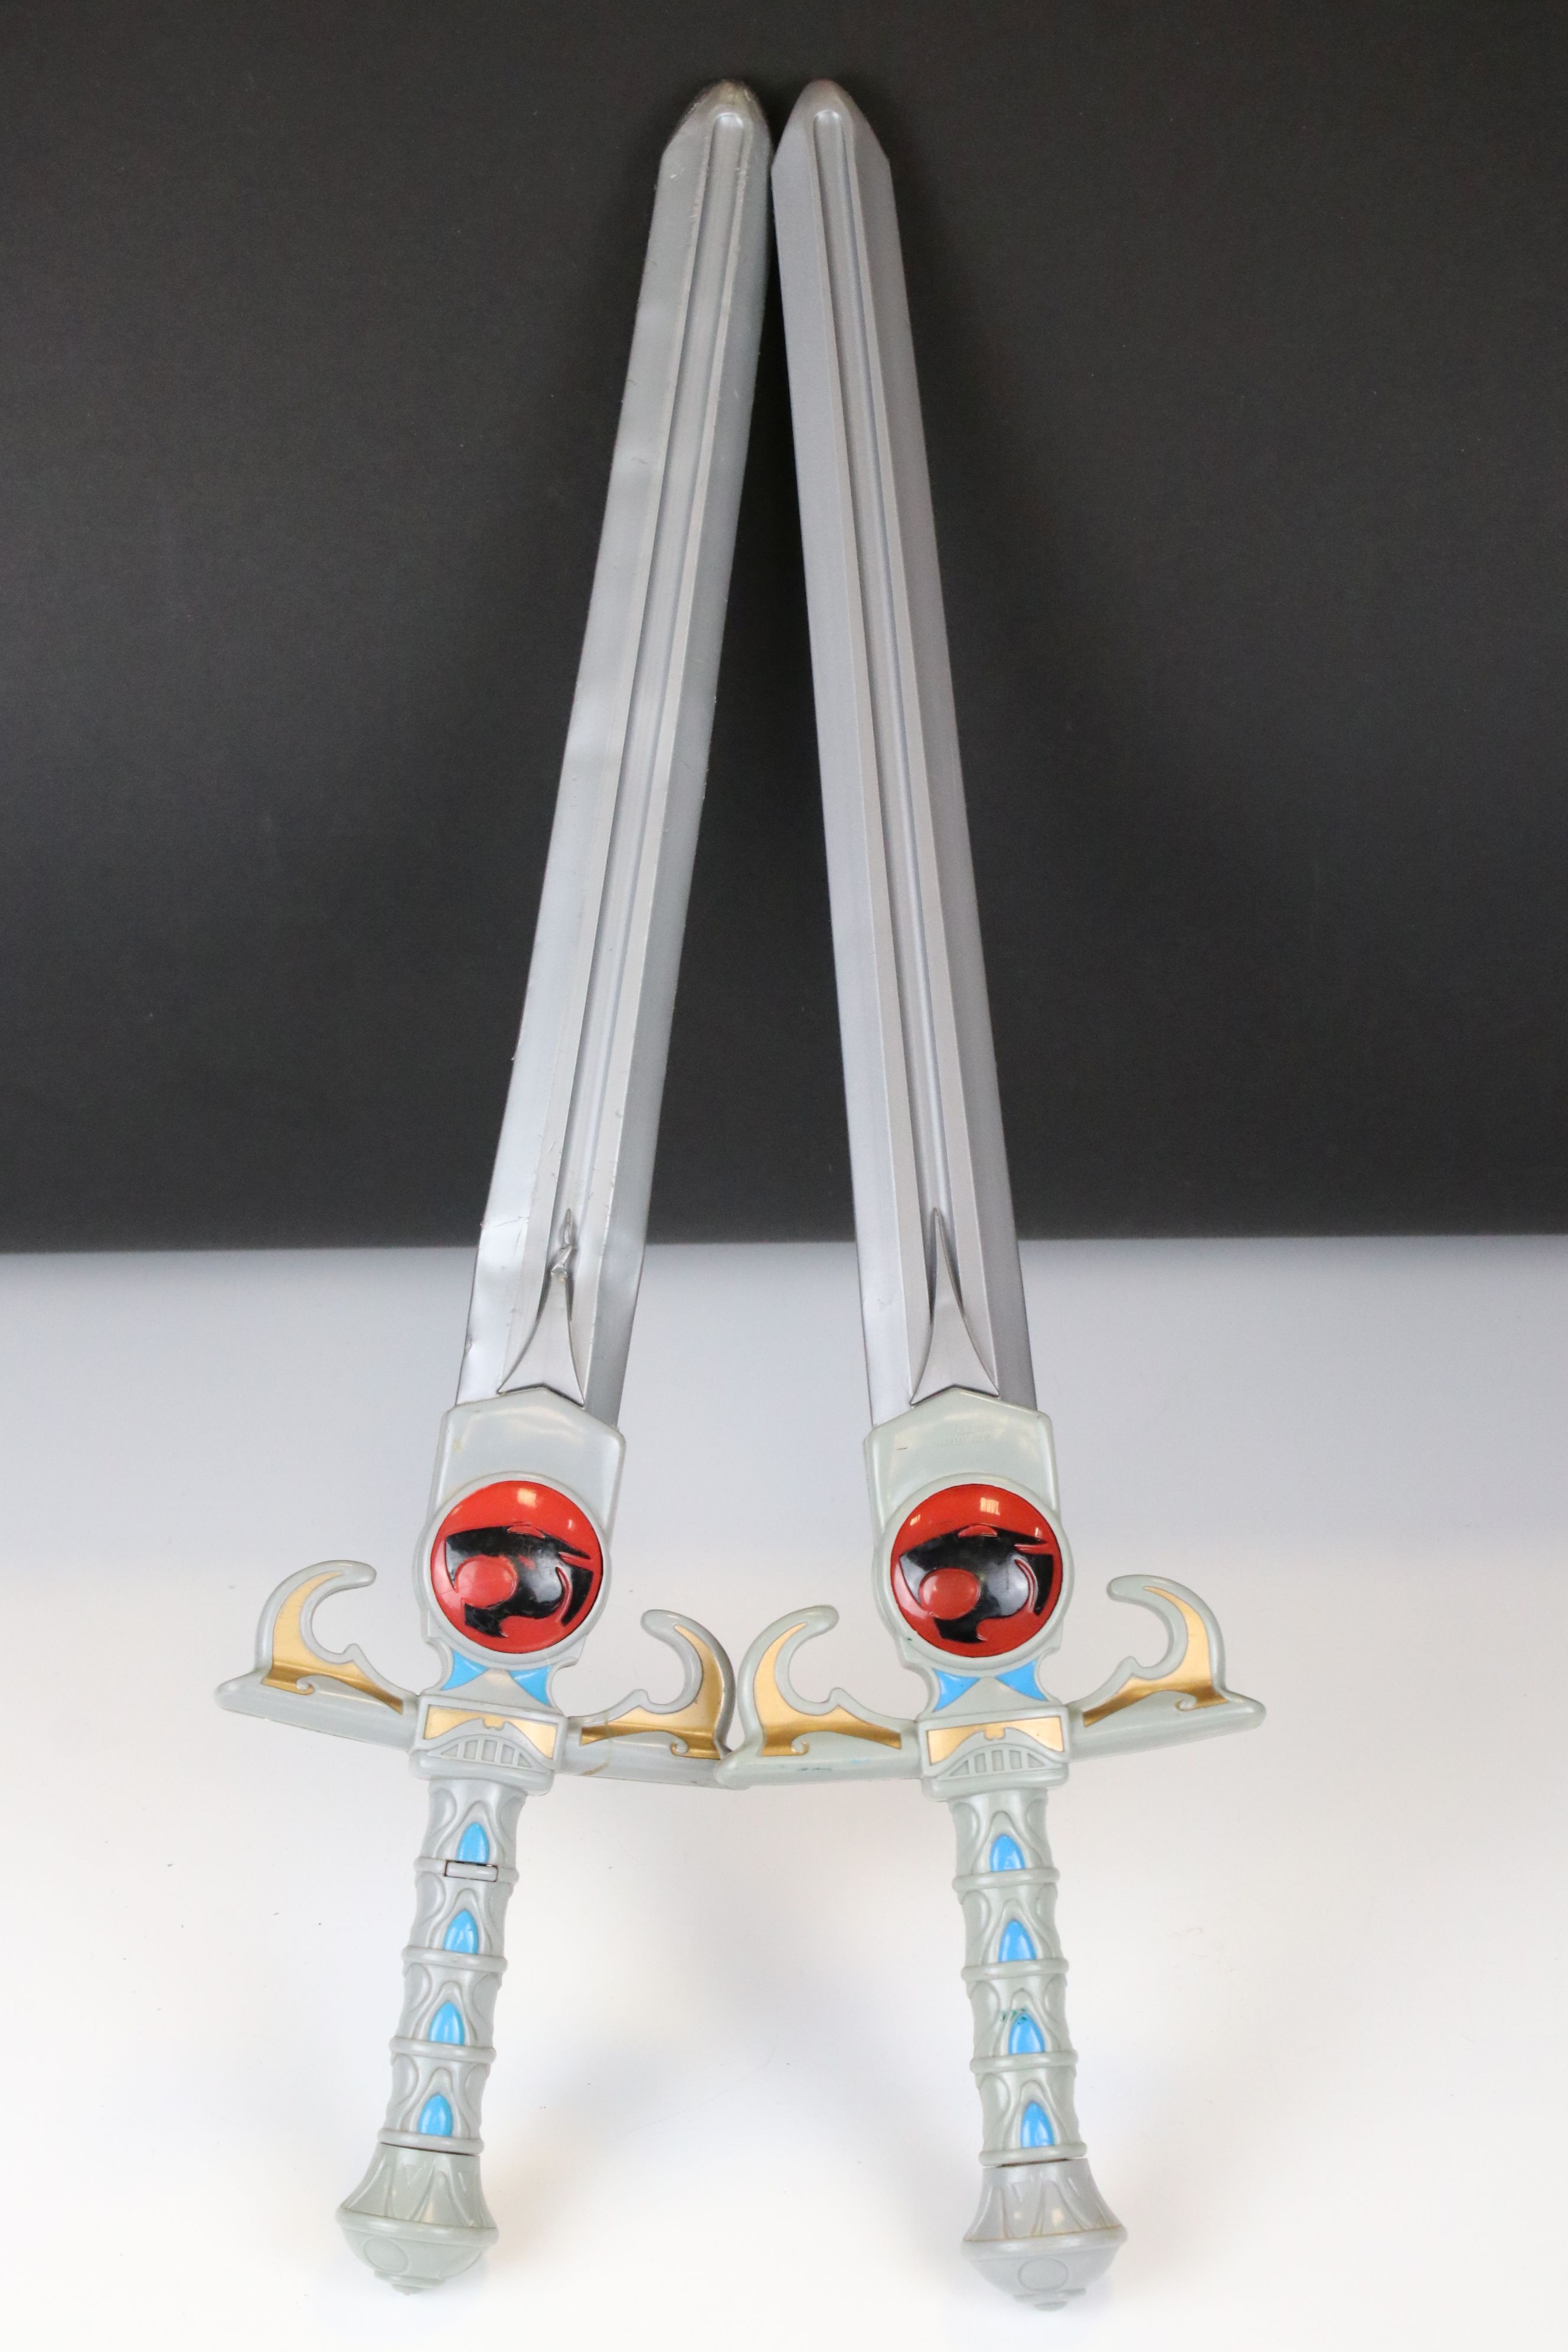 Thundercats - Two LJN Lion-O Sword of Omens with light up Eye of Thundera, 1 x gd overall with